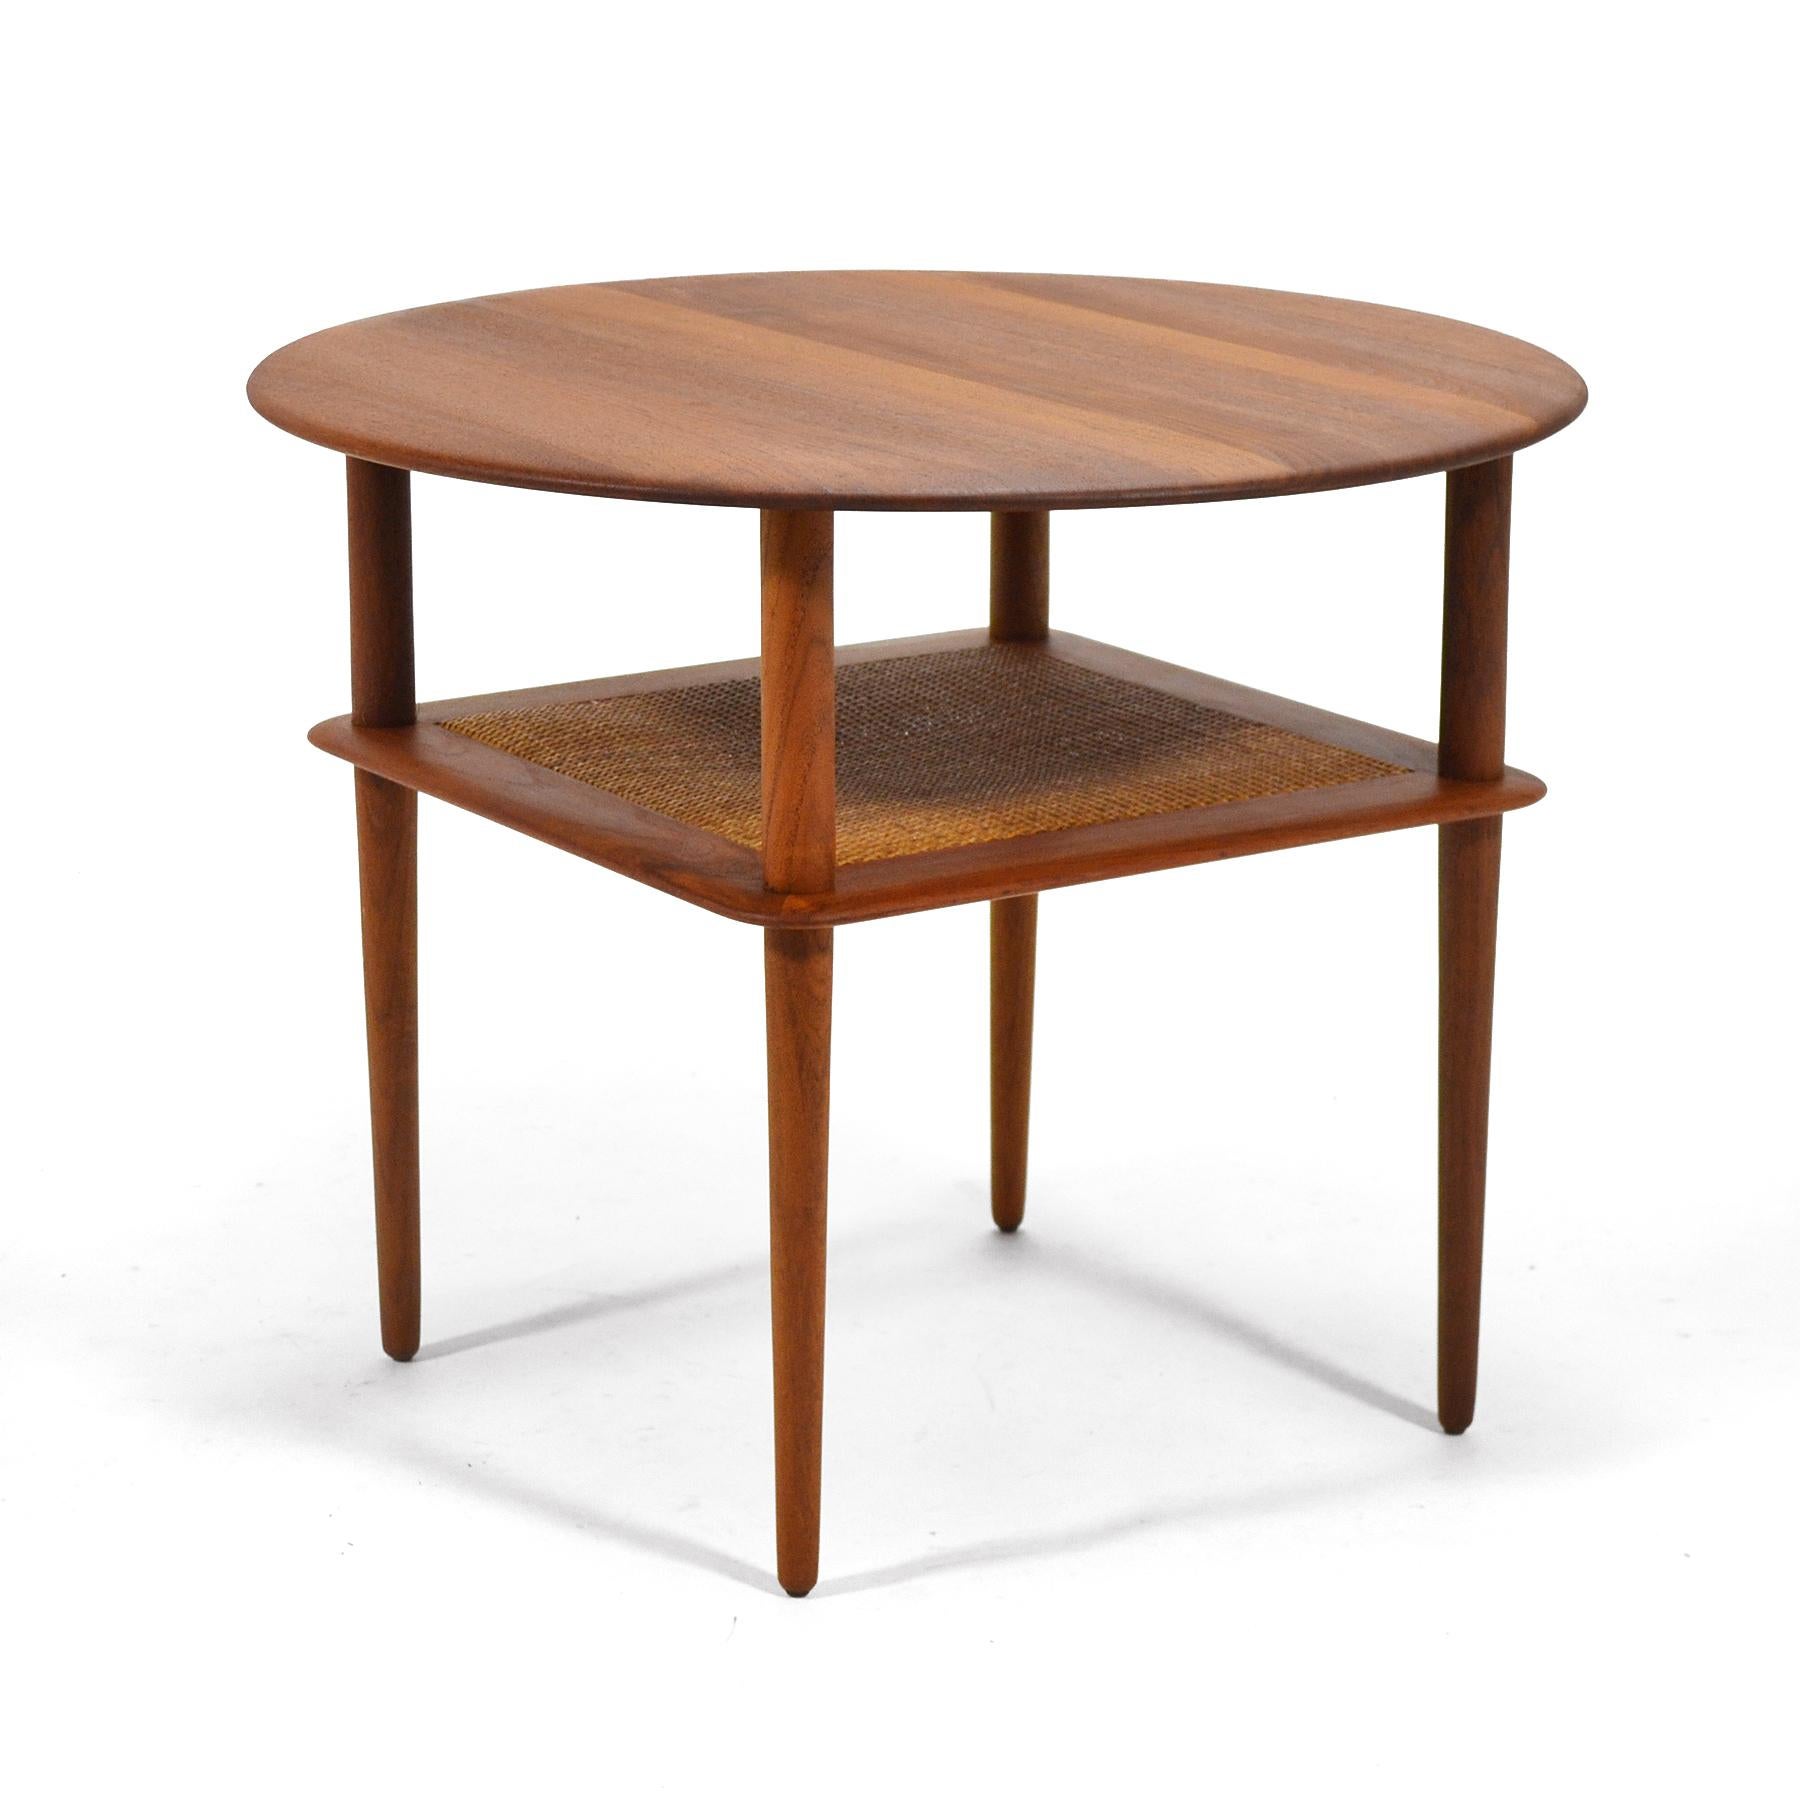 This rare Peter Hvidt & Orla Mølgaard-Nielsen design from 1956 is an uncommon round version of the two-tiered tables designed for France & Daverkosen. It features all solid teak construction and a cane lower shelf. It is marked with a medallion from